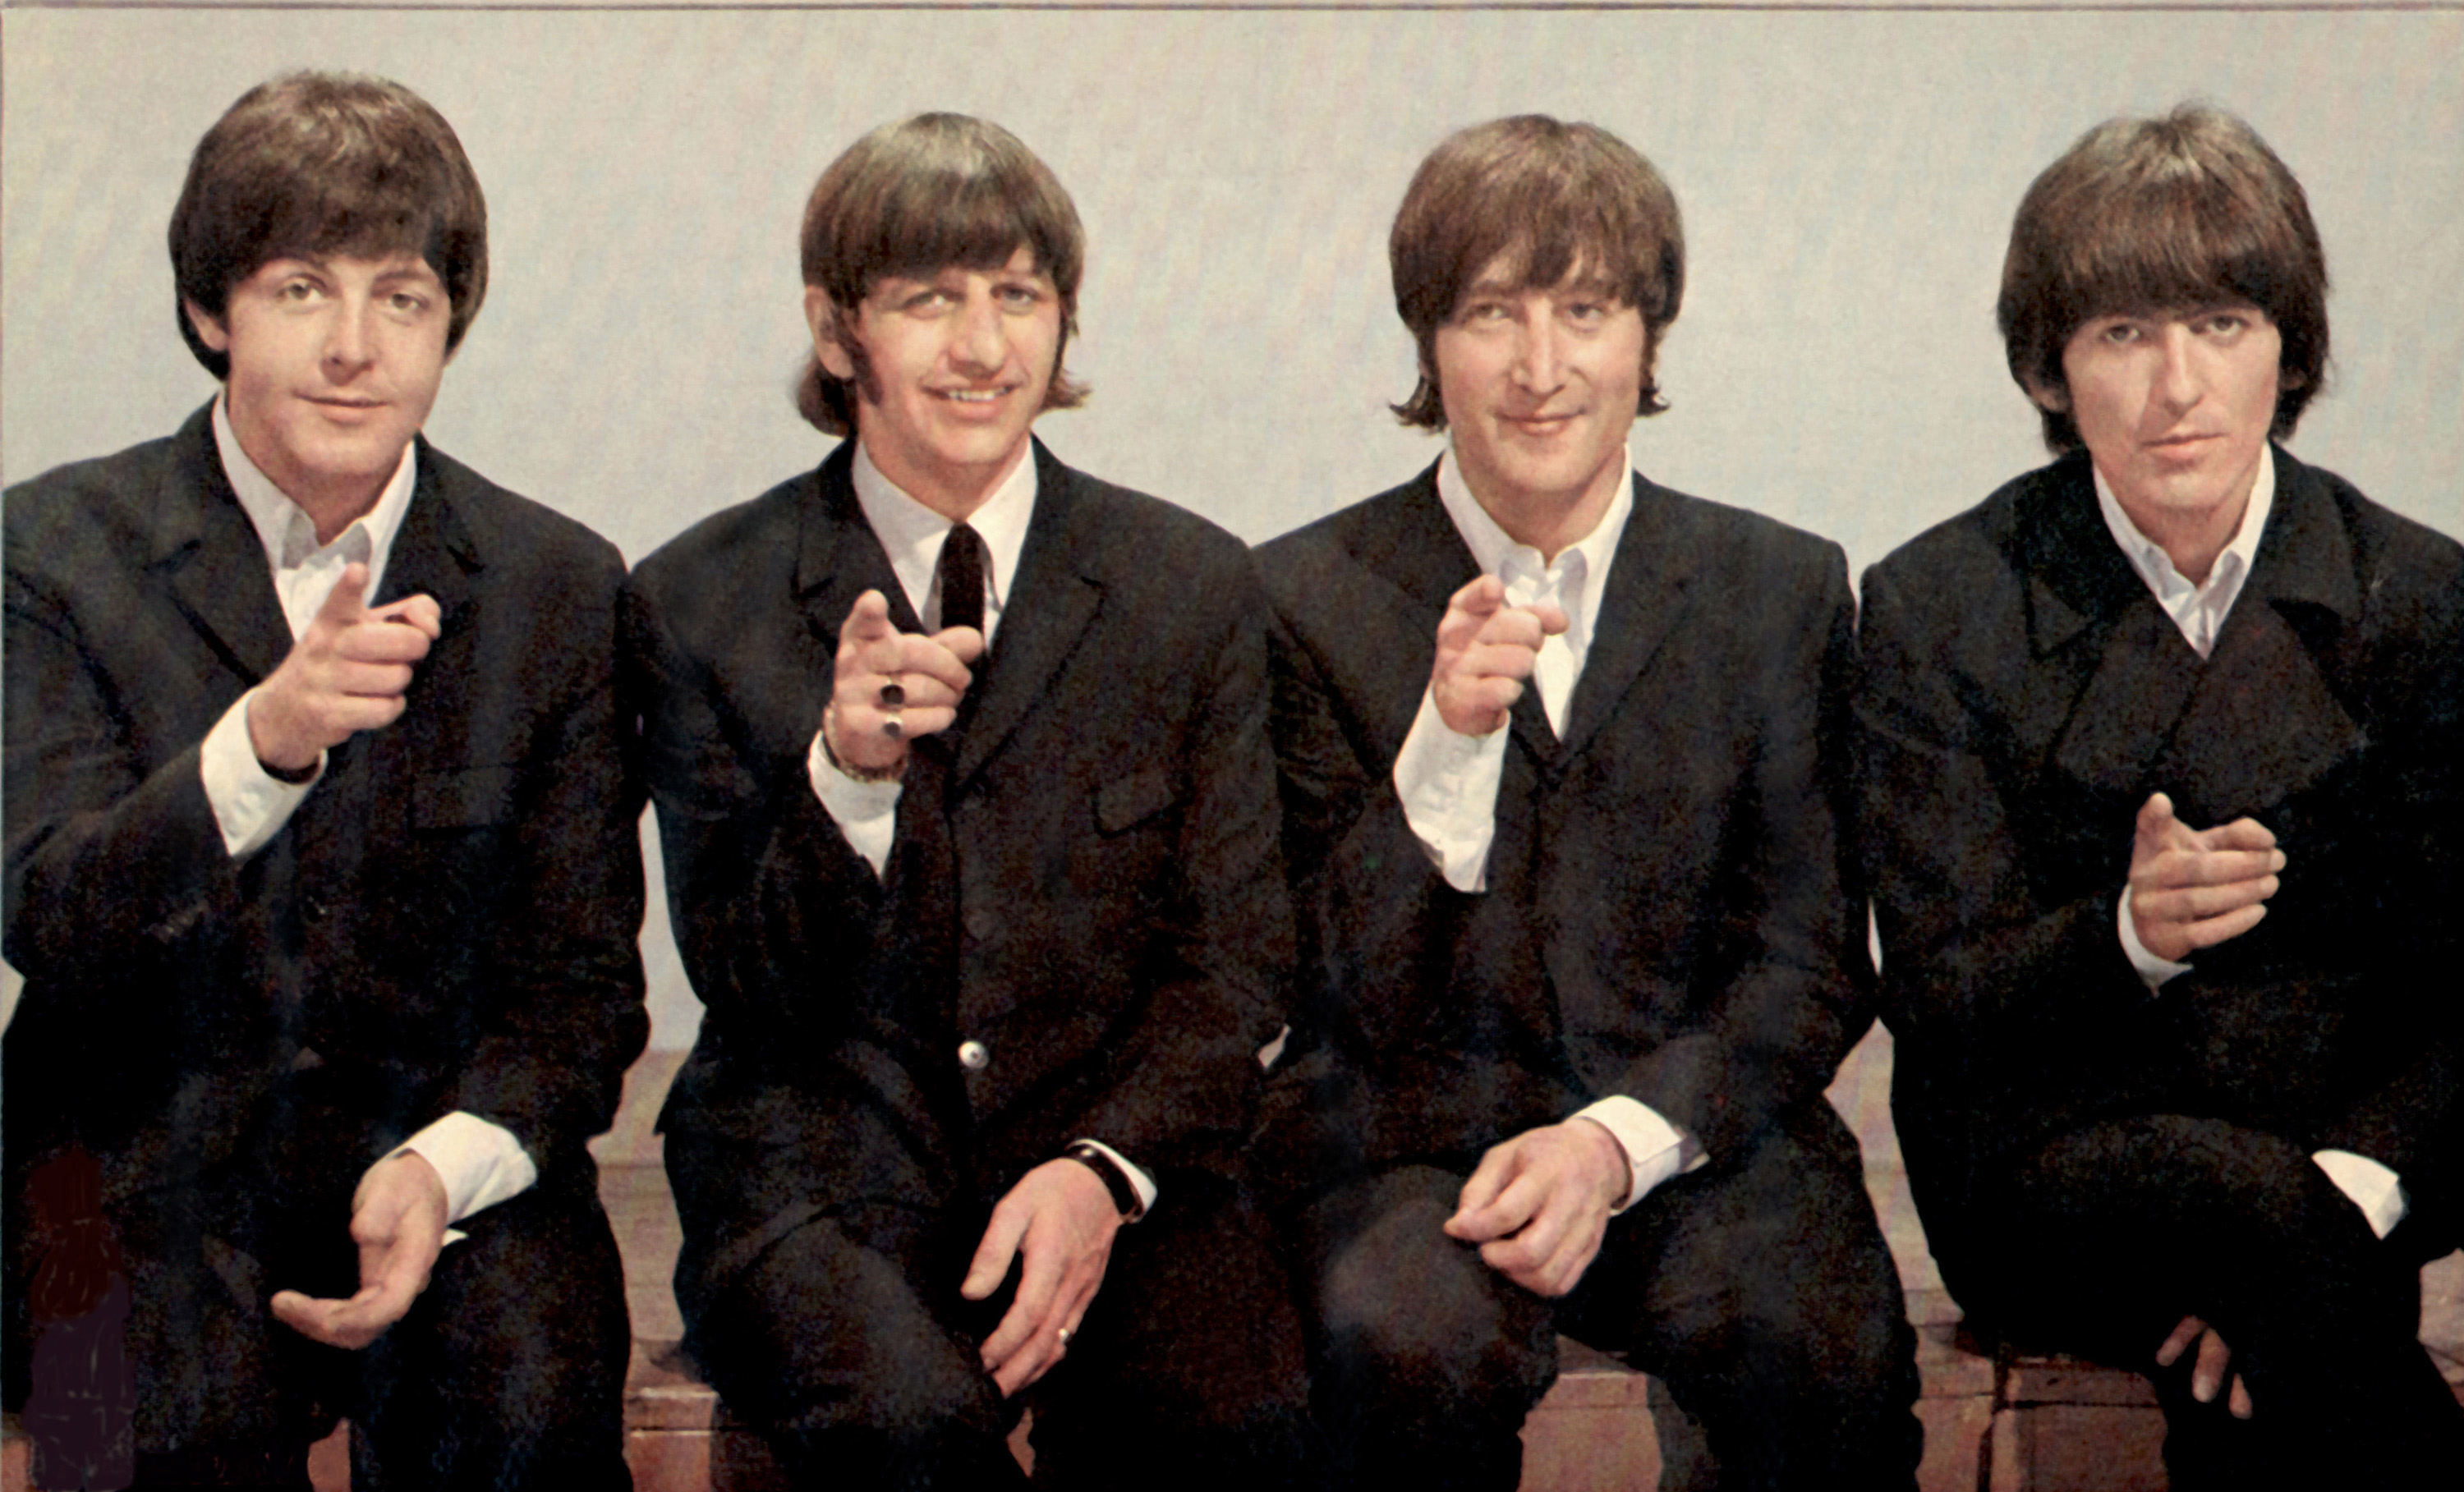 The Beatles Songs Streamed 50 Million Times in 48 Hours | Time